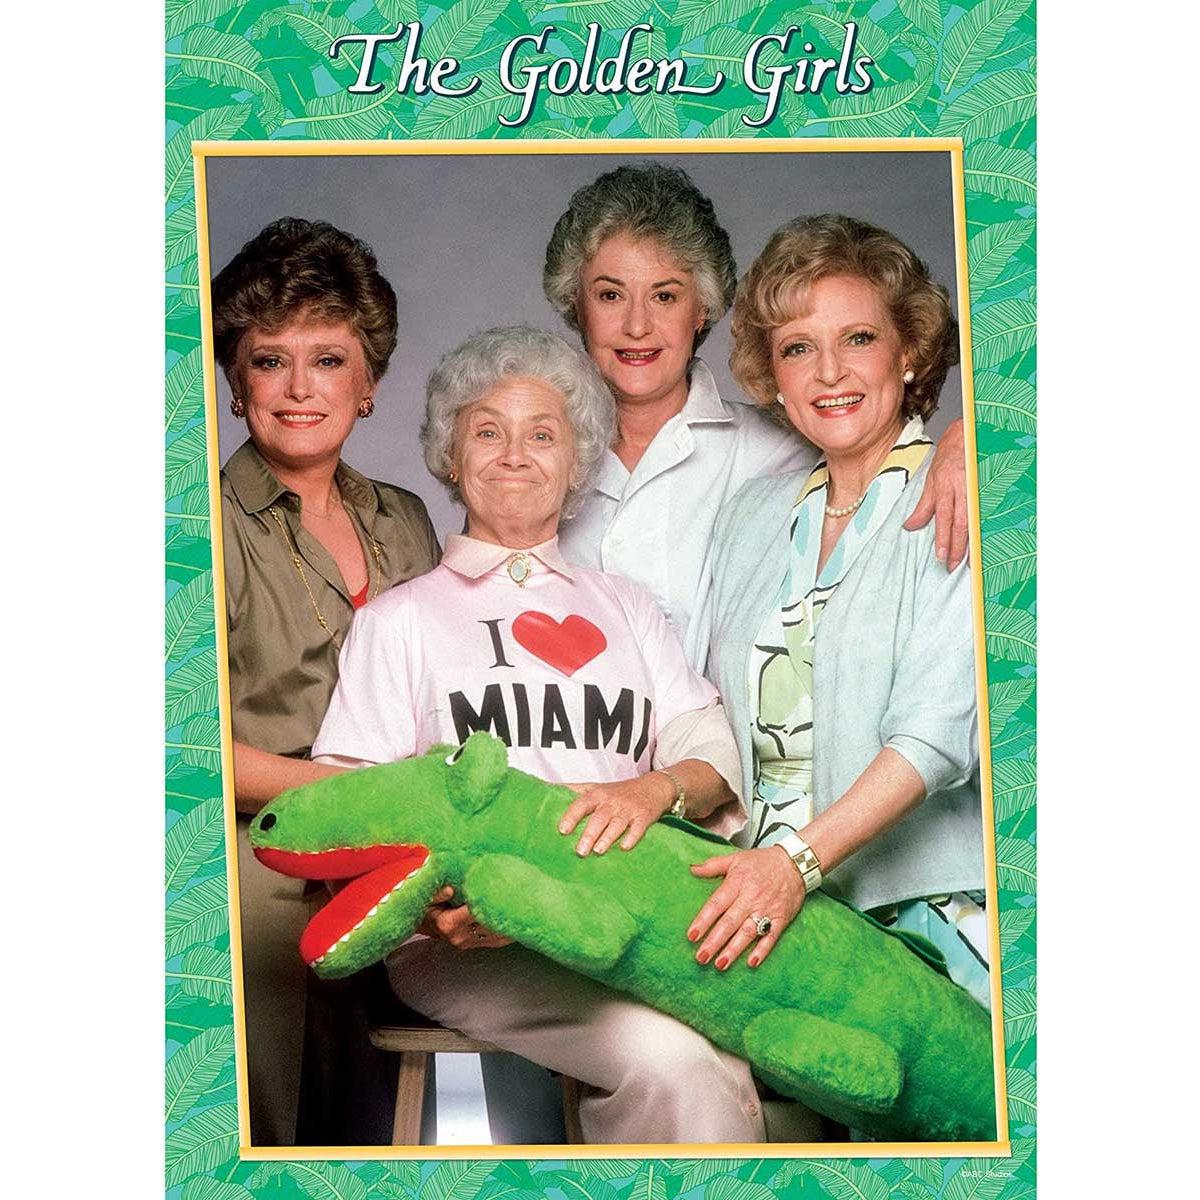 USAopoly-The Golden Girls - I Heart Miami - 1,000 Piece puzzle-PZ118-509-Legacy Toys